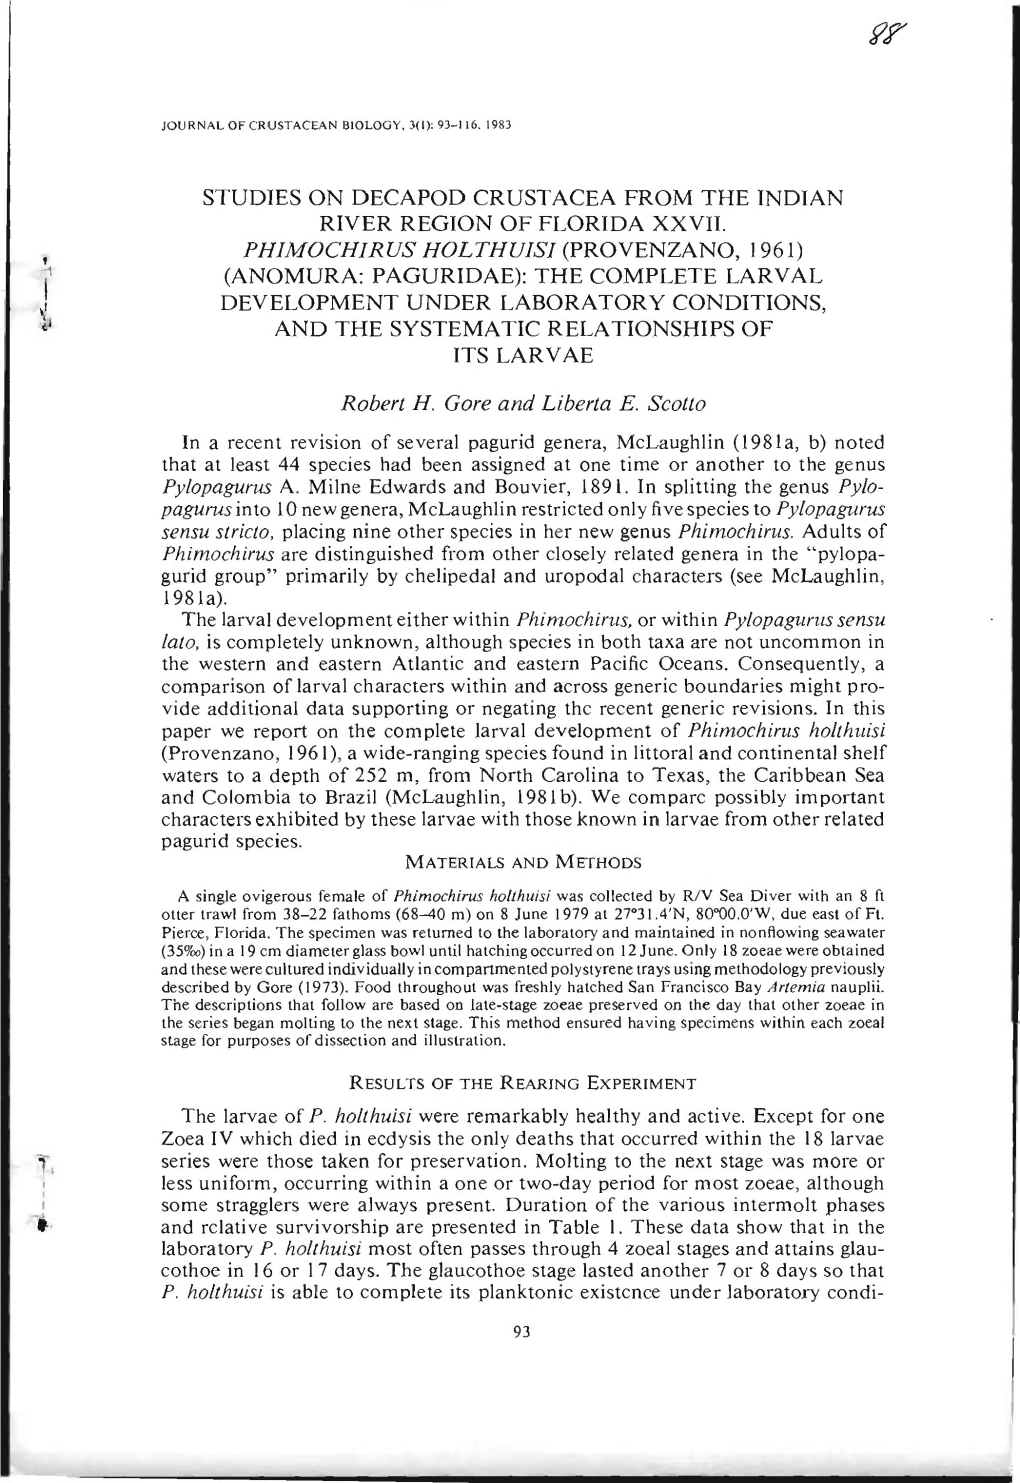 Studies on Decapod Crustacea from the Indian River Region of Florida Xxvii